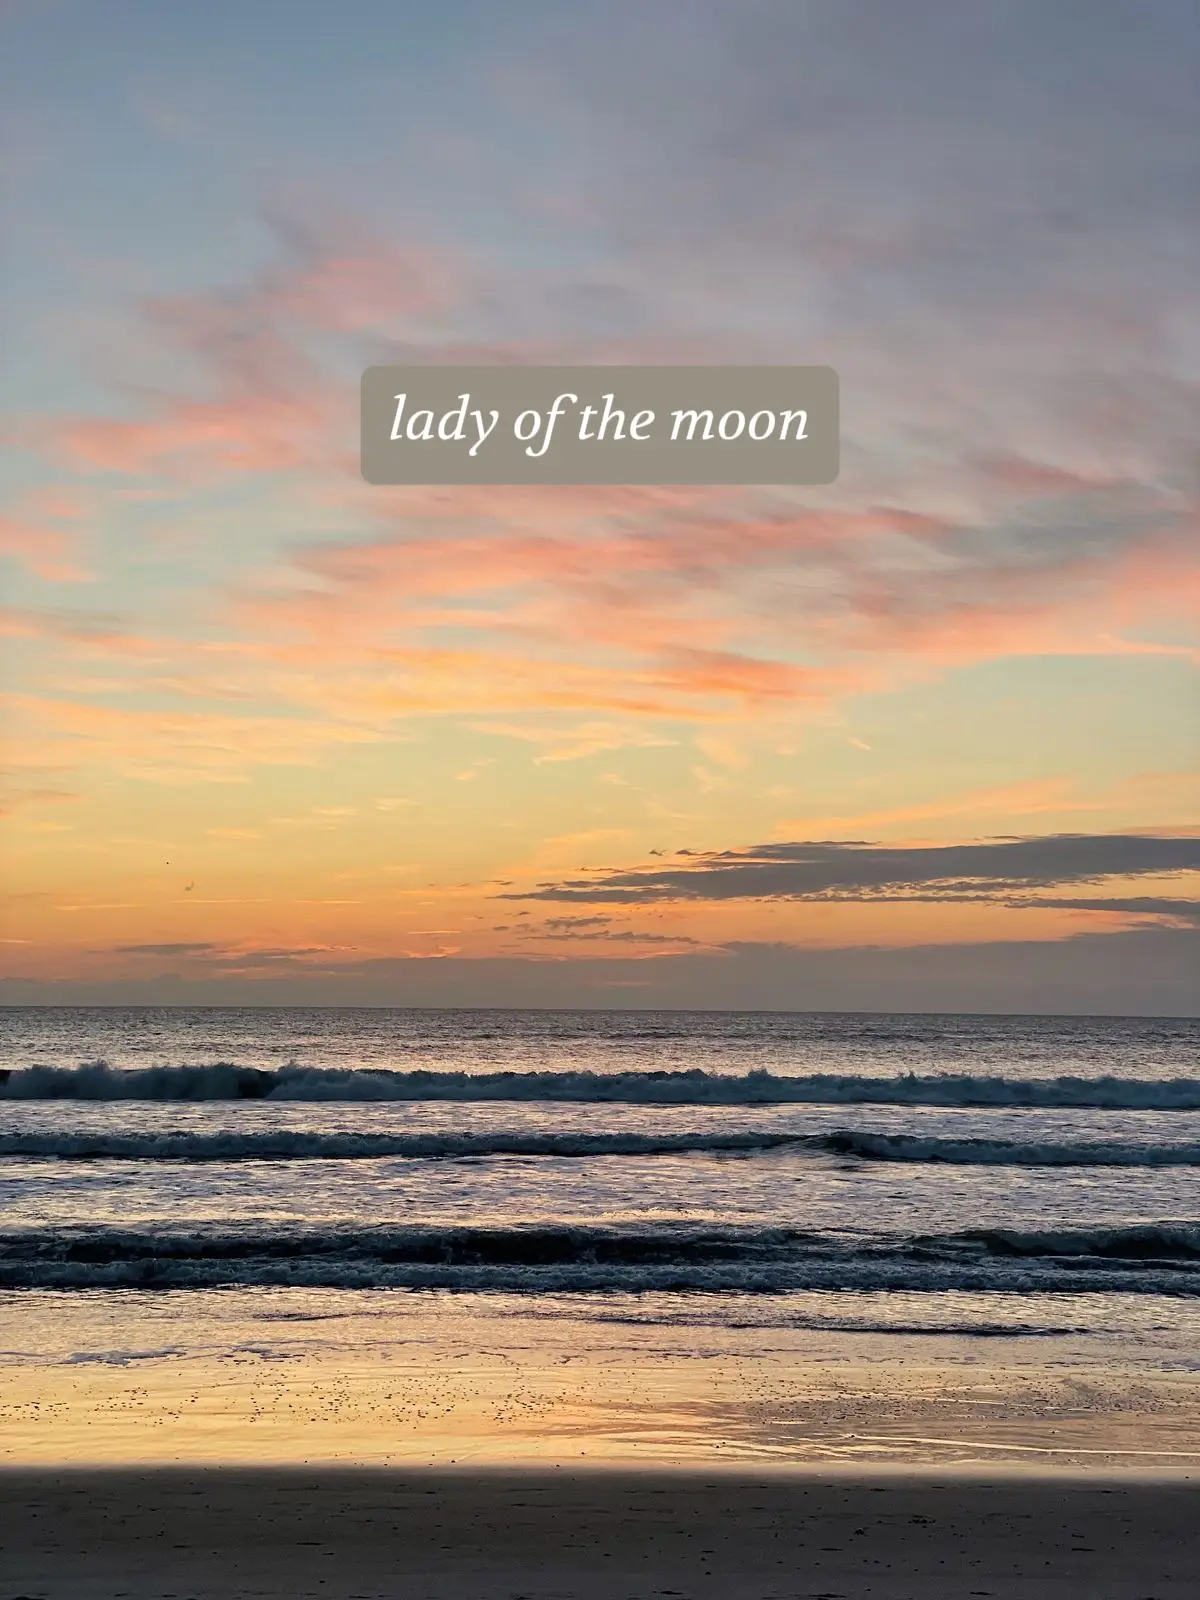  The image shows a beach with the ocean and the moon. The moon is casting a warm glow over the water, creating a beautiful scene. The beach is empty, with no people visible in the image.